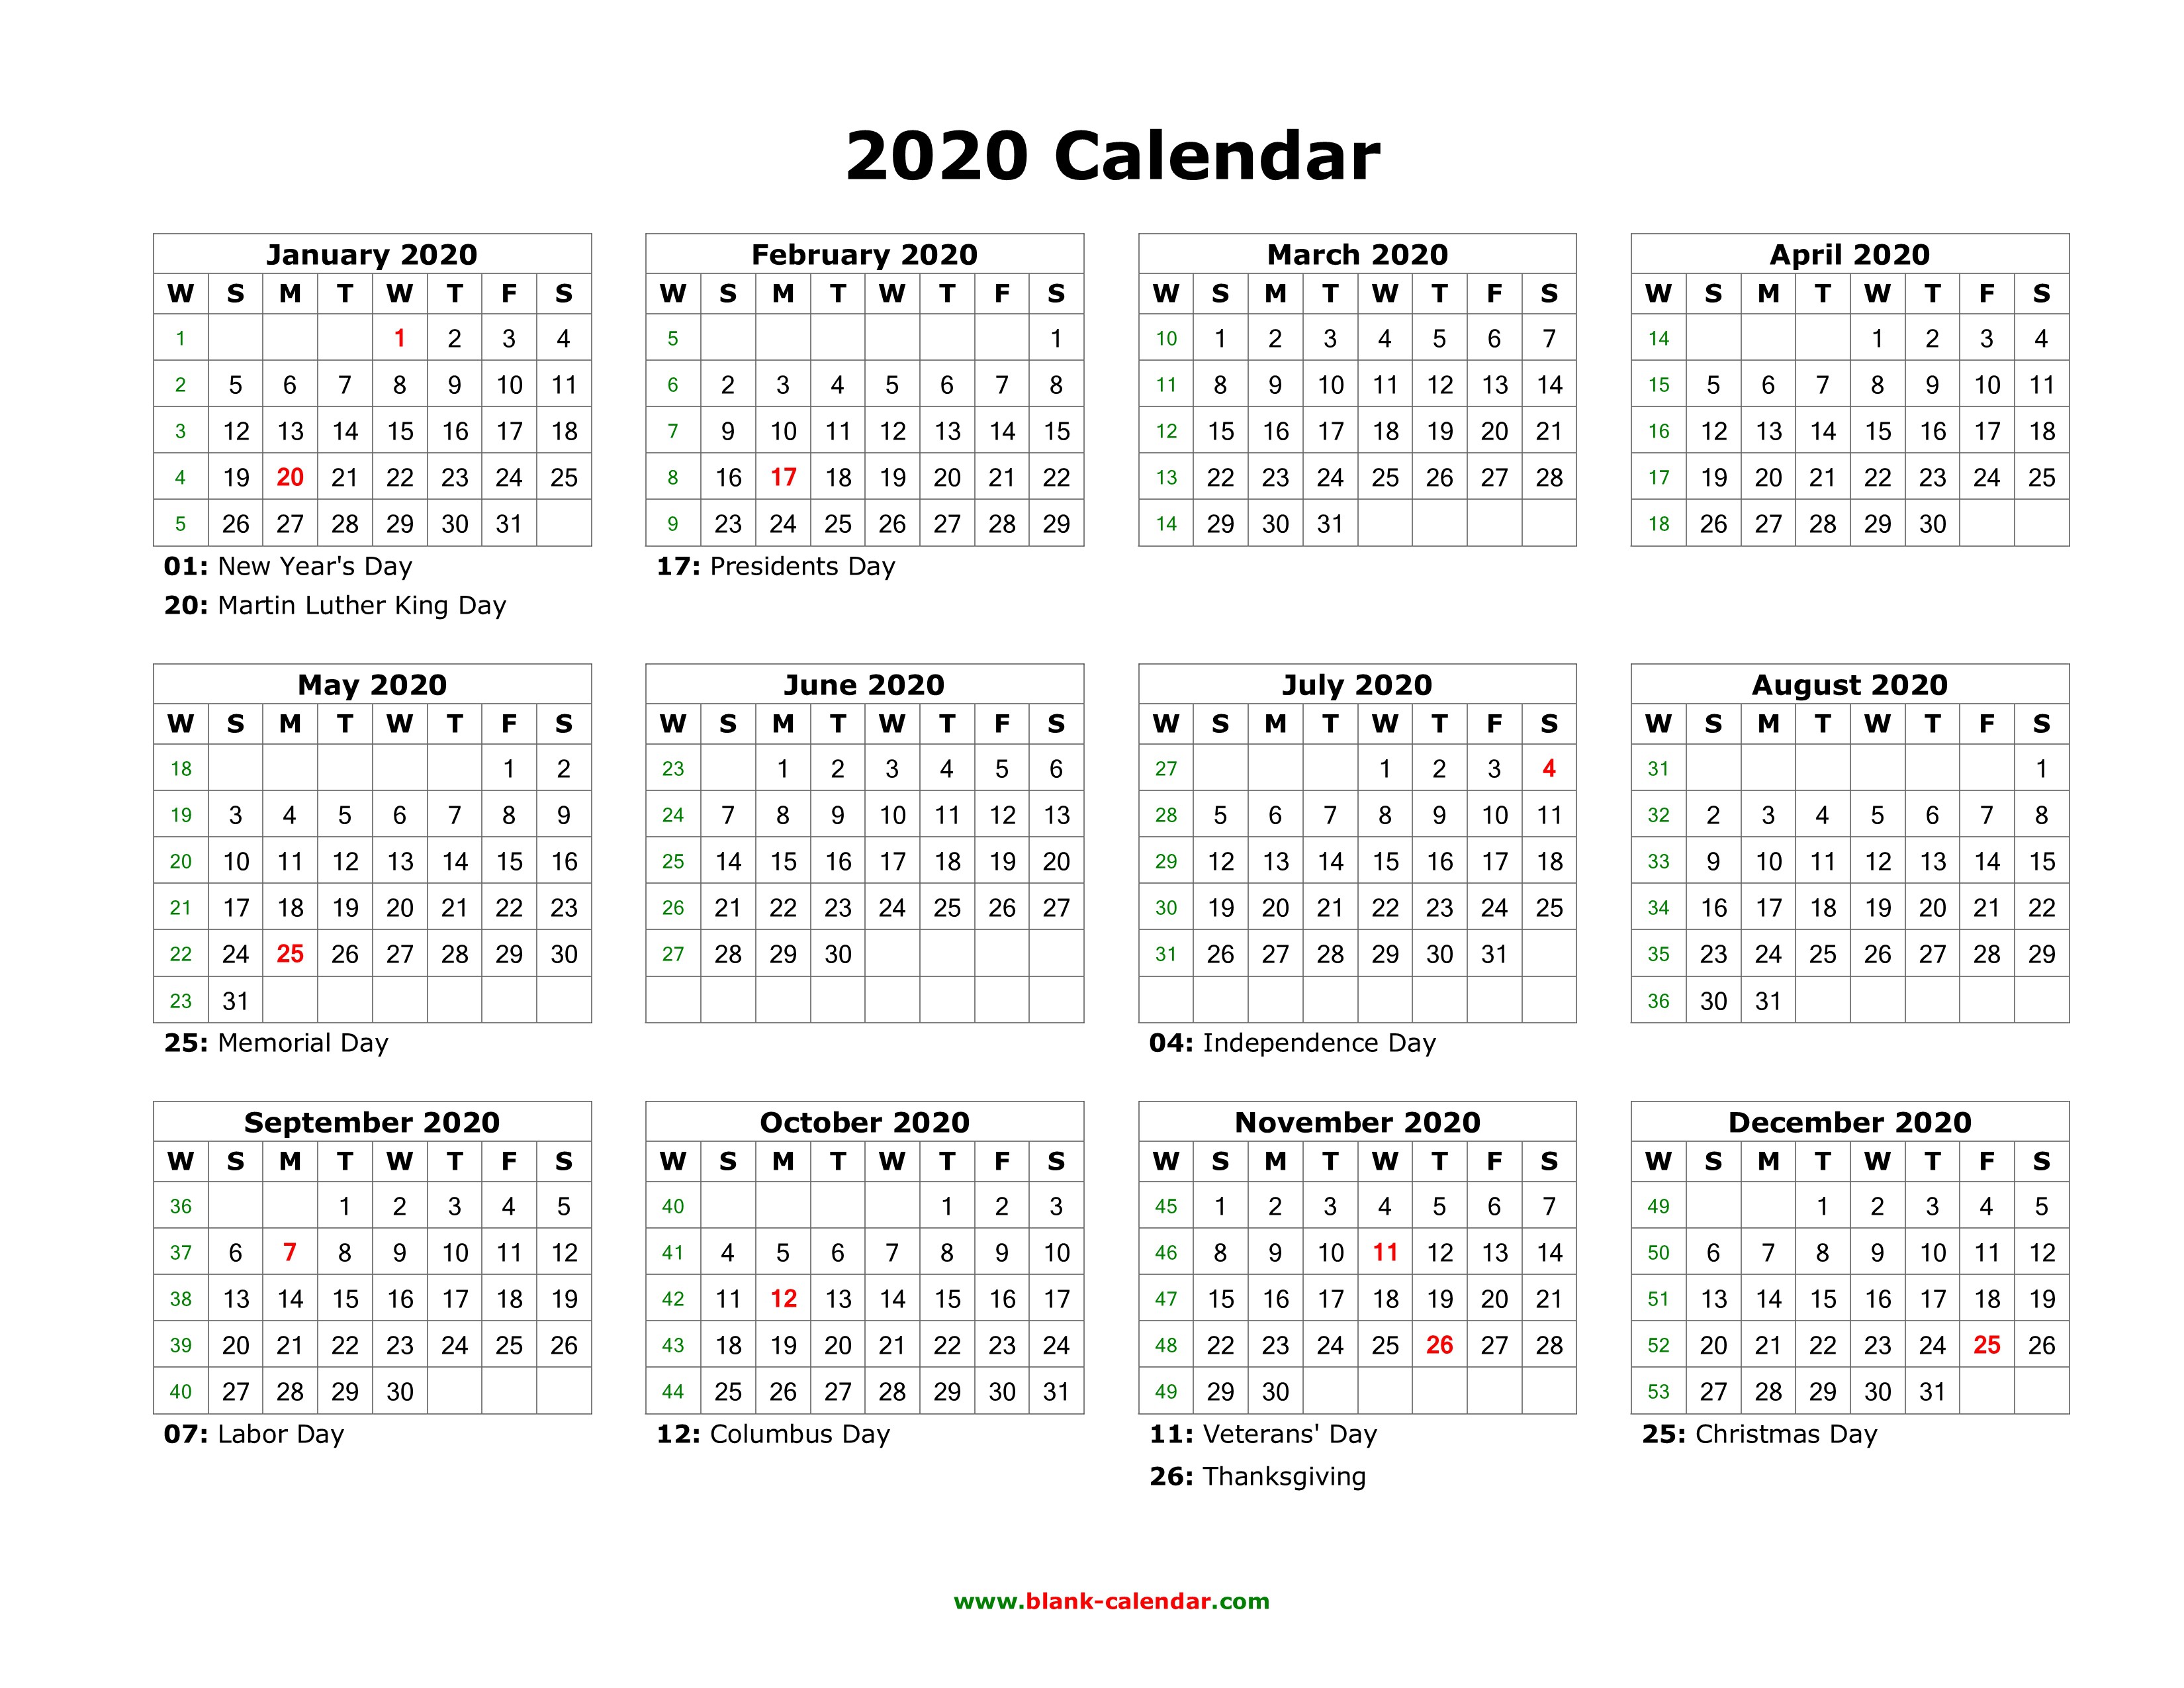 download blank calendar 2020 with us holidays 12 months